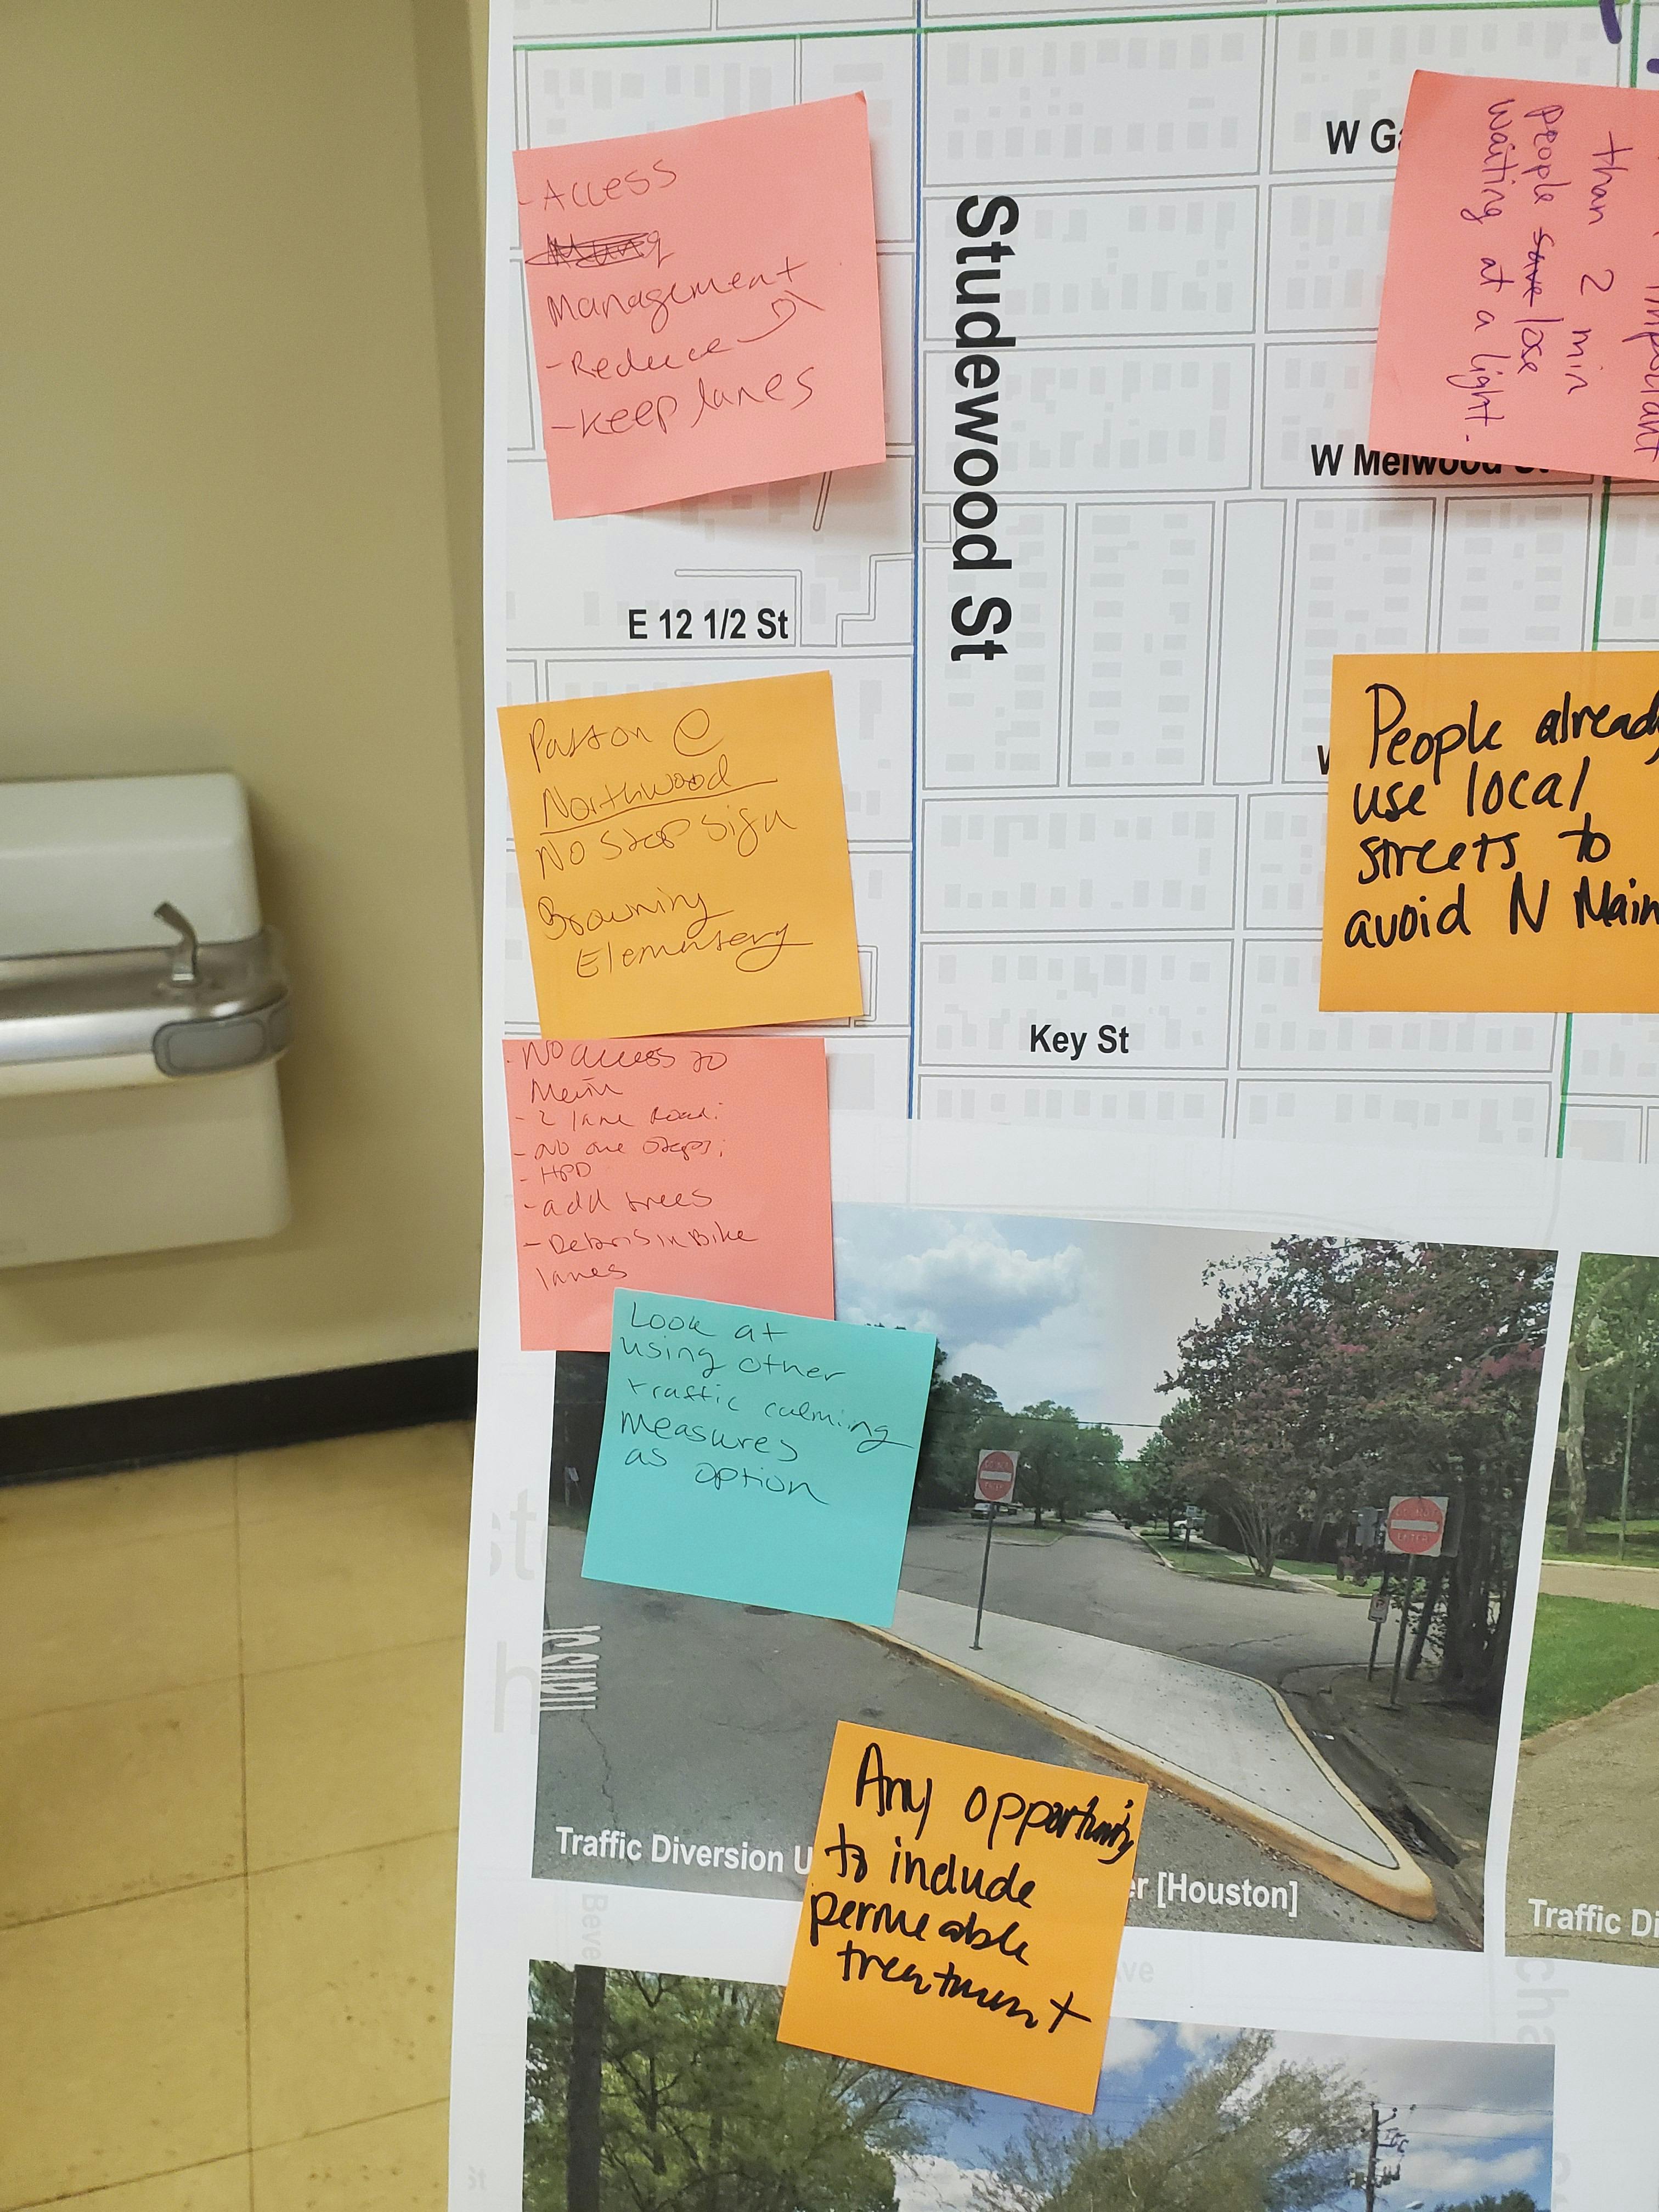 Comments on Proposed Intersection and Crossing Improvements Phase 2 Posterboard